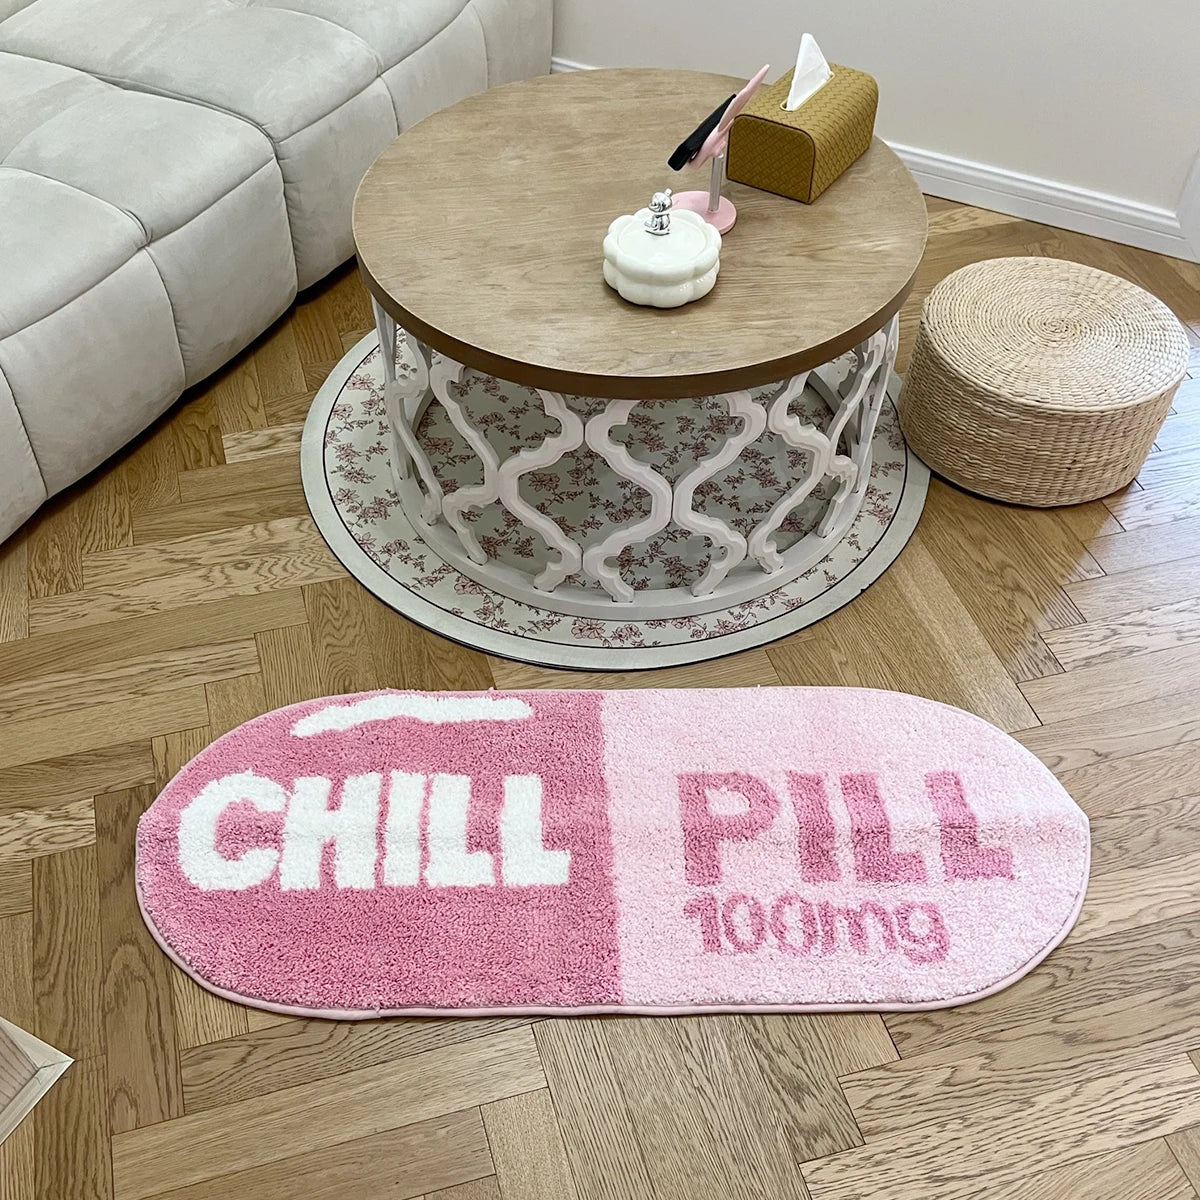 Chill Pill Custom Oval Rug - Pink Tufted Bath Mat with Anti-Slip Backing